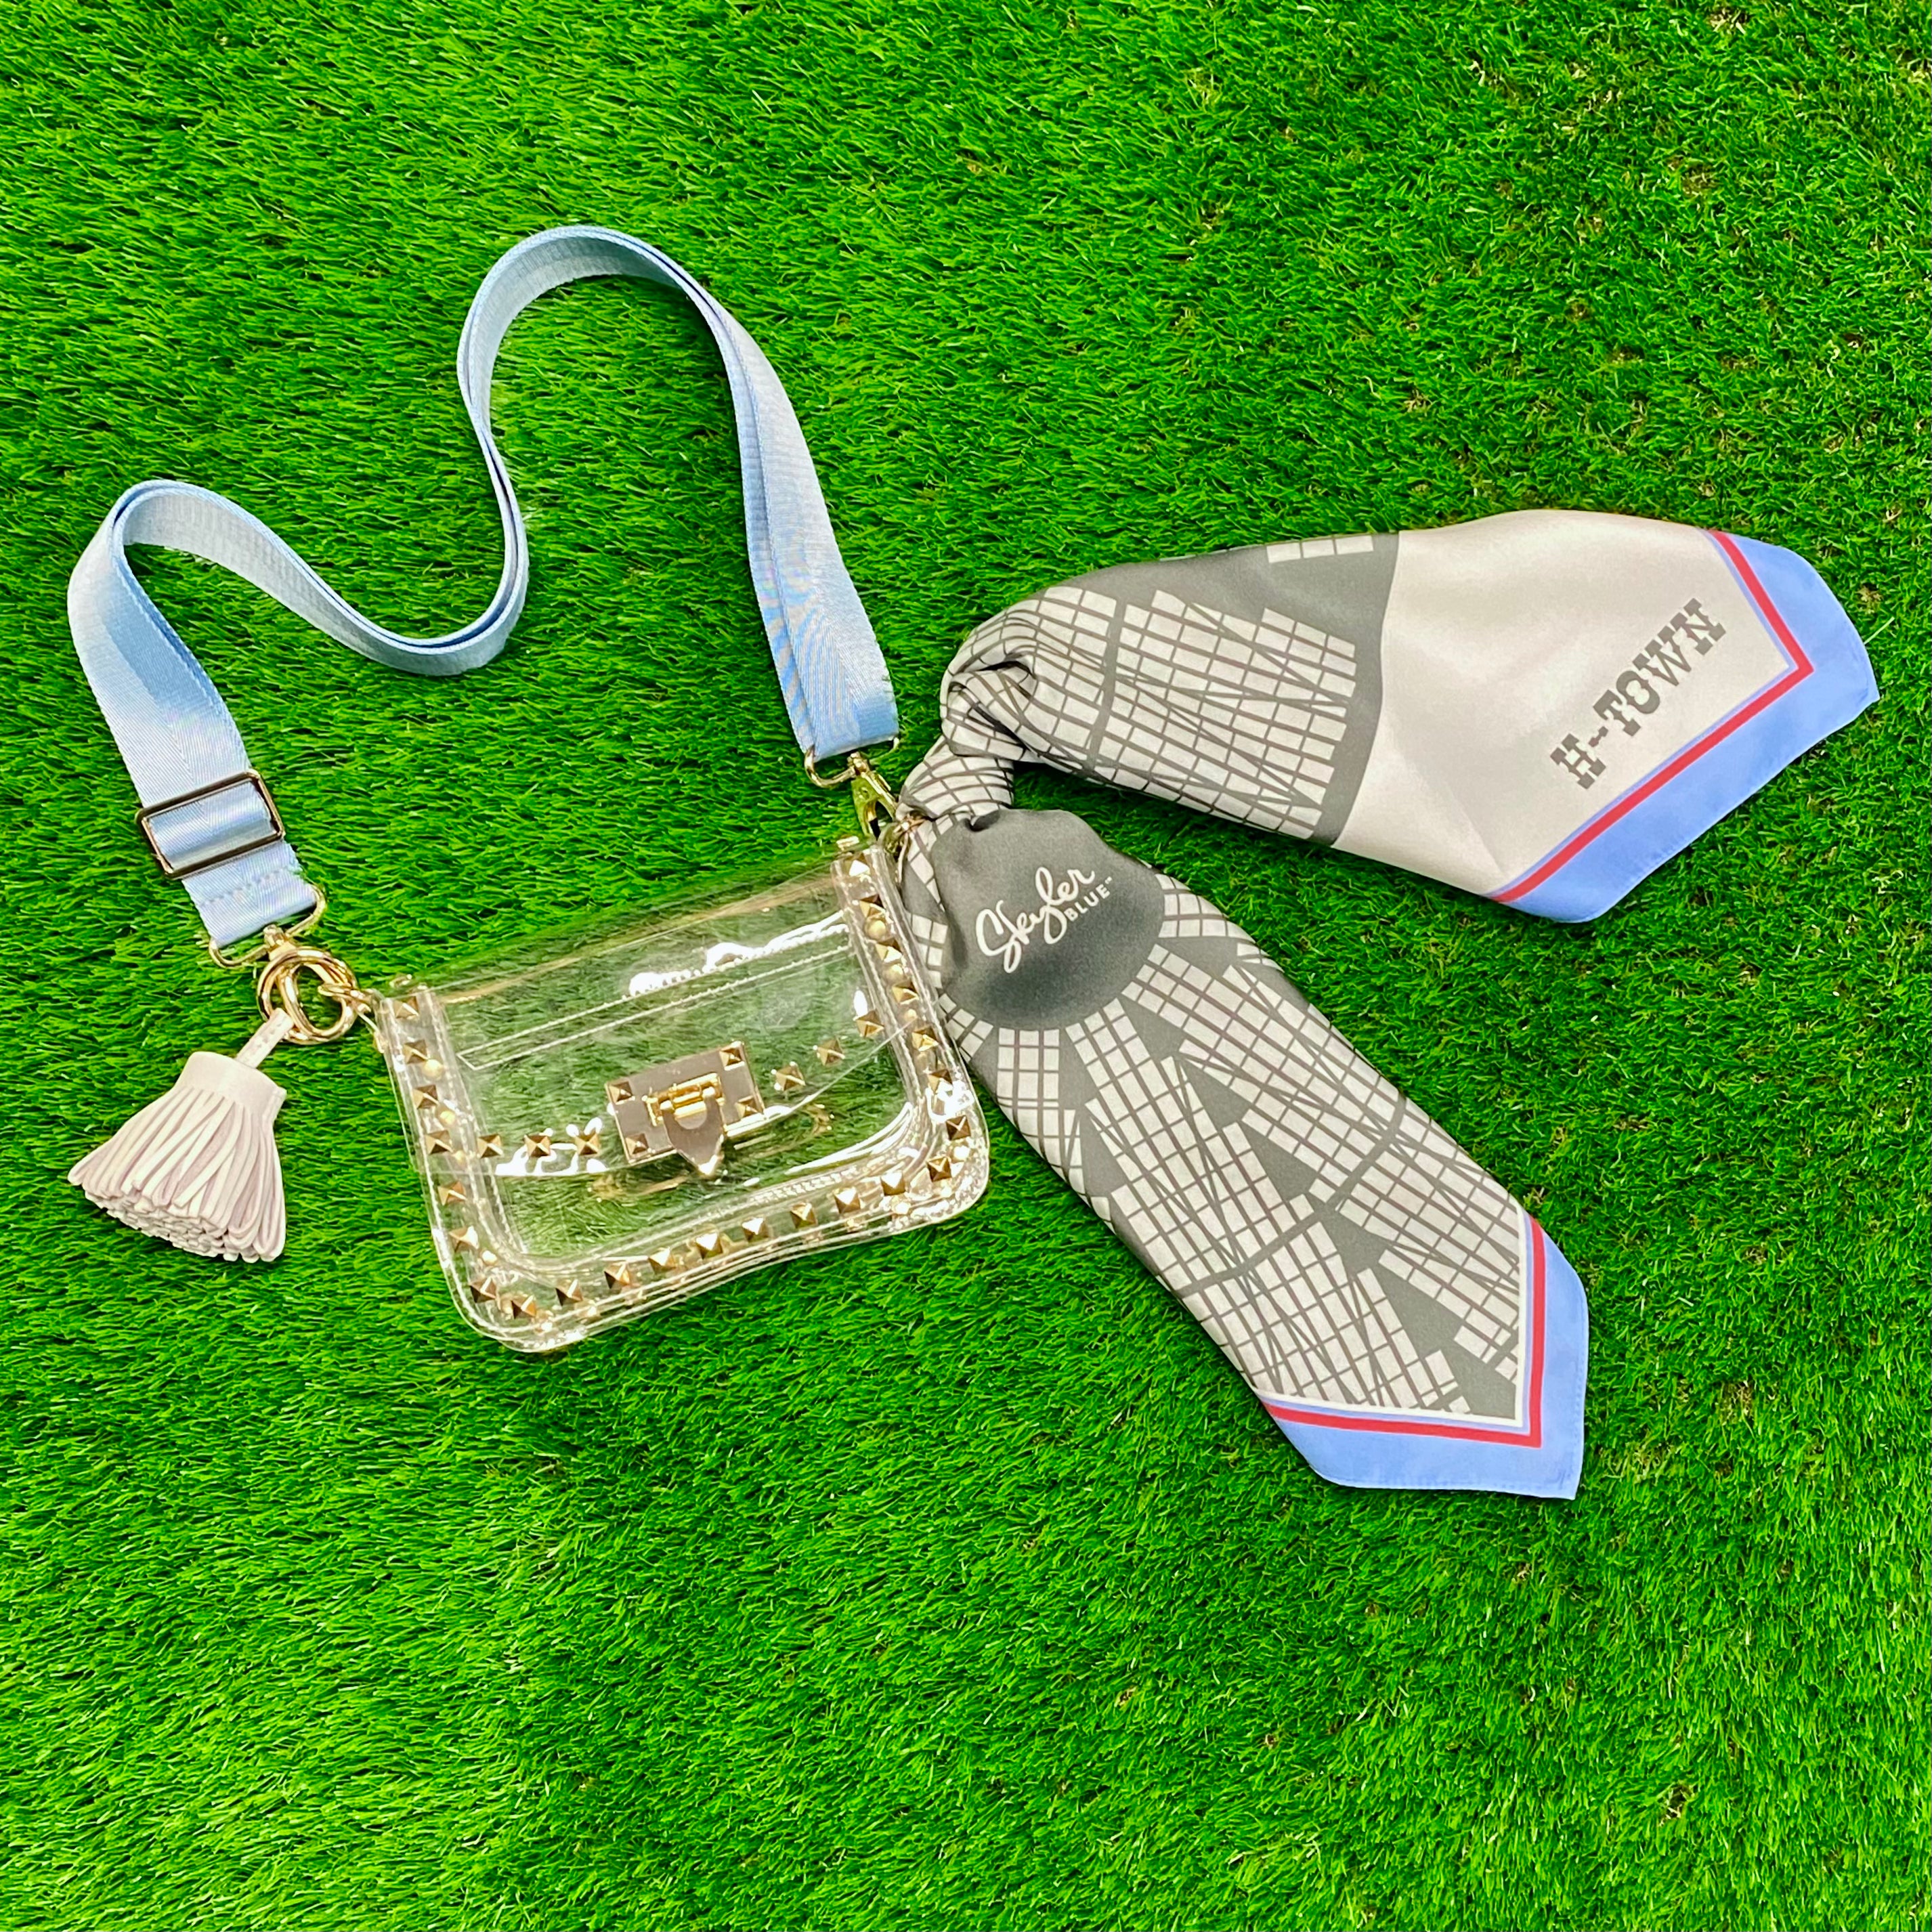 Skyler Blue’s The Dome - H-Town Small Studded Clear Bag stadium approved clear bag / clear purse including adjustable, nylon webbing shoulder or crossbody strap with herringbone weave and gold hardware, 60-centimeter 100% silk twill scarf, and 100% genuine leather tassel. 